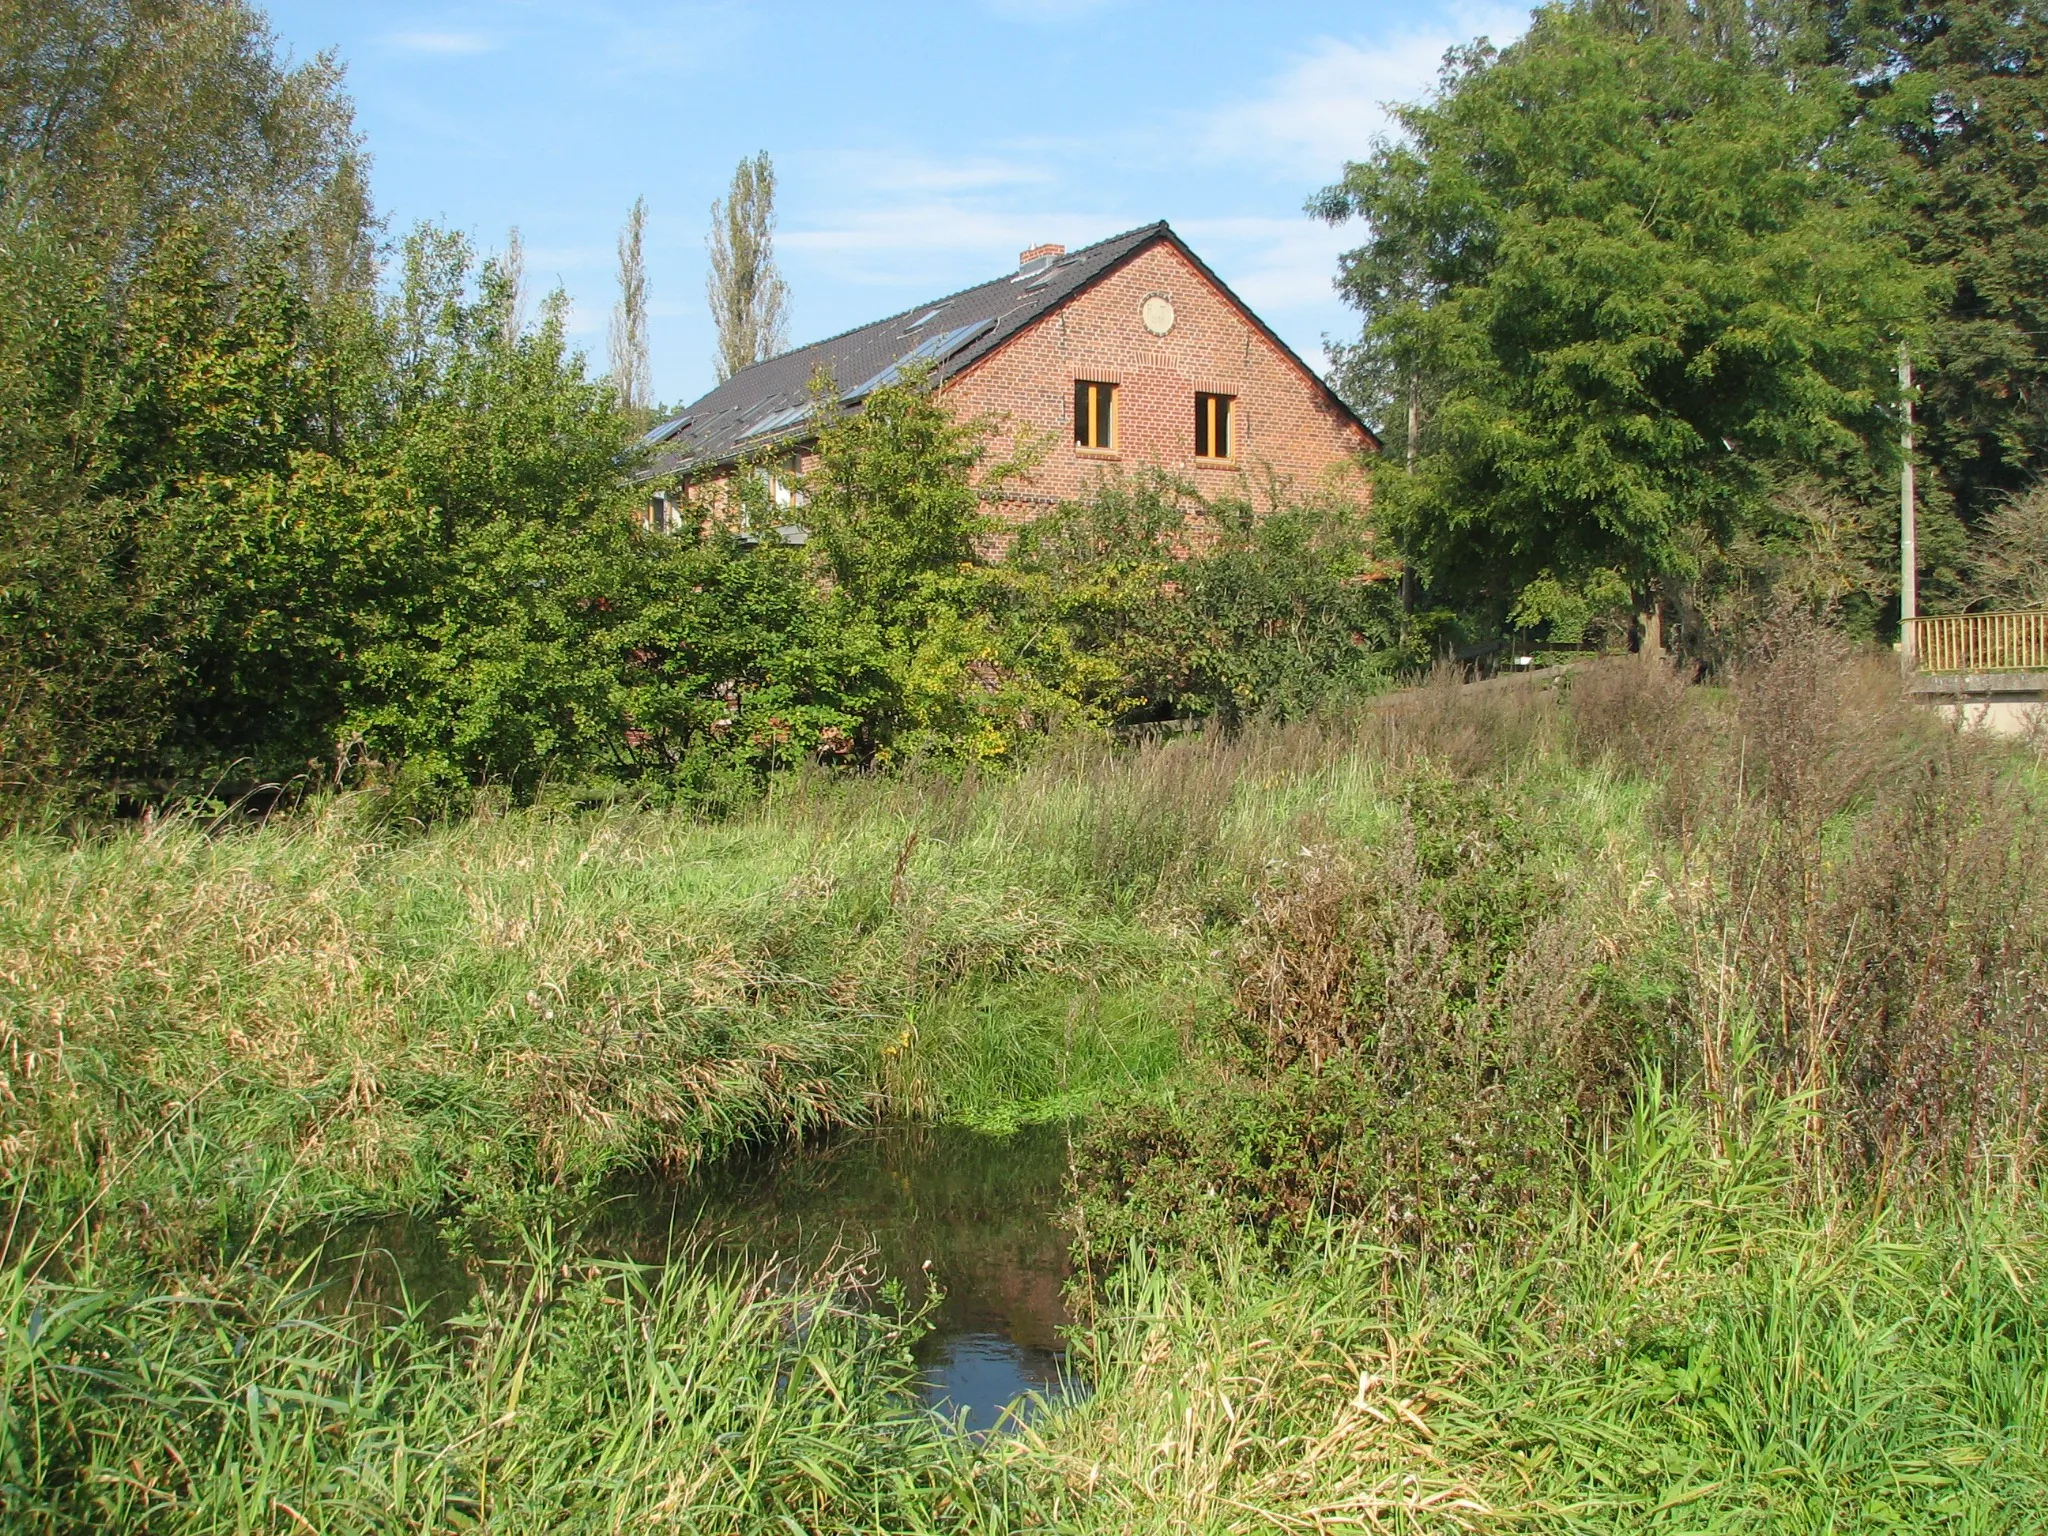 Photo showing: At this spot stood the former Heidemühle, which once belonged to the village Münchehofe.